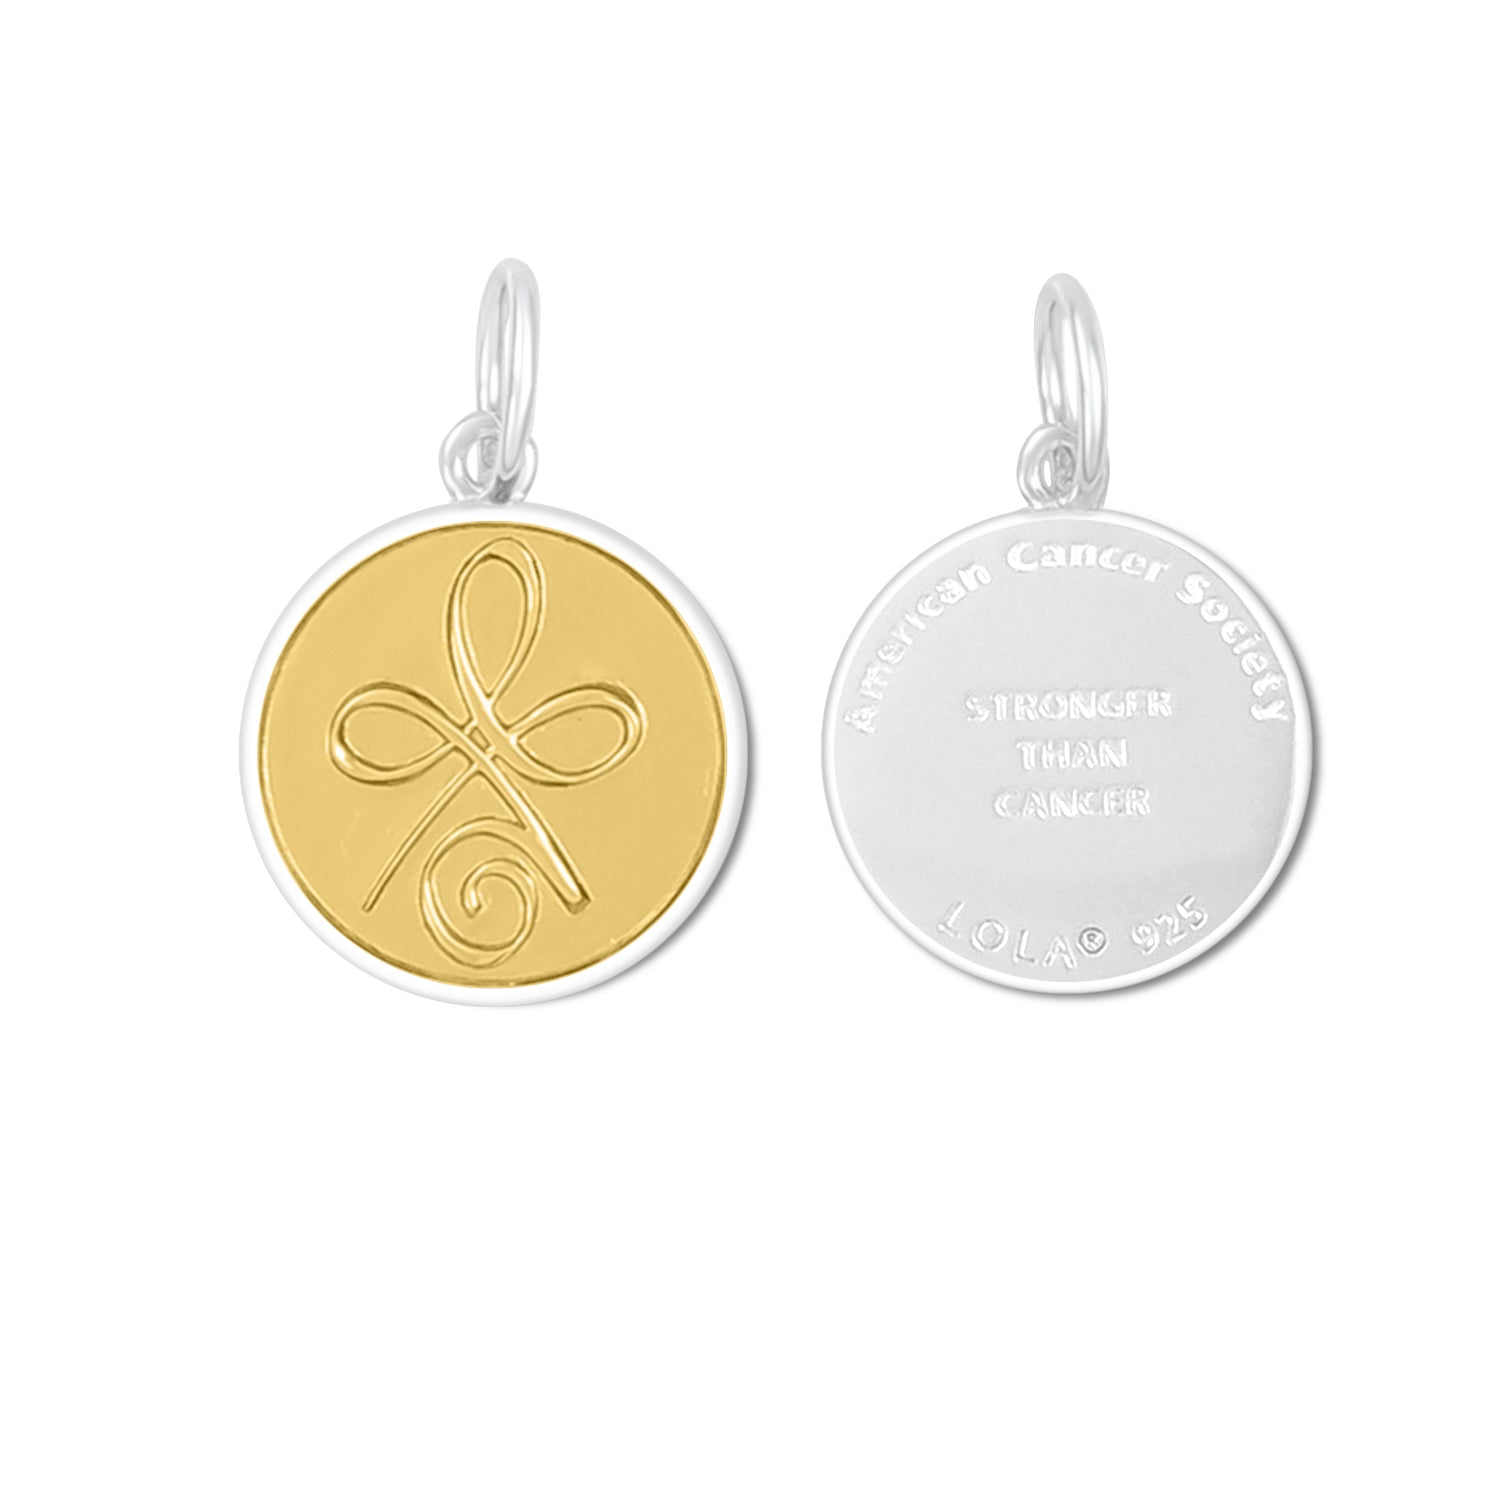 AMERICAN CANCER SOCIETY CELTIC KNOT OF STRENGTH GOLD-LOLA